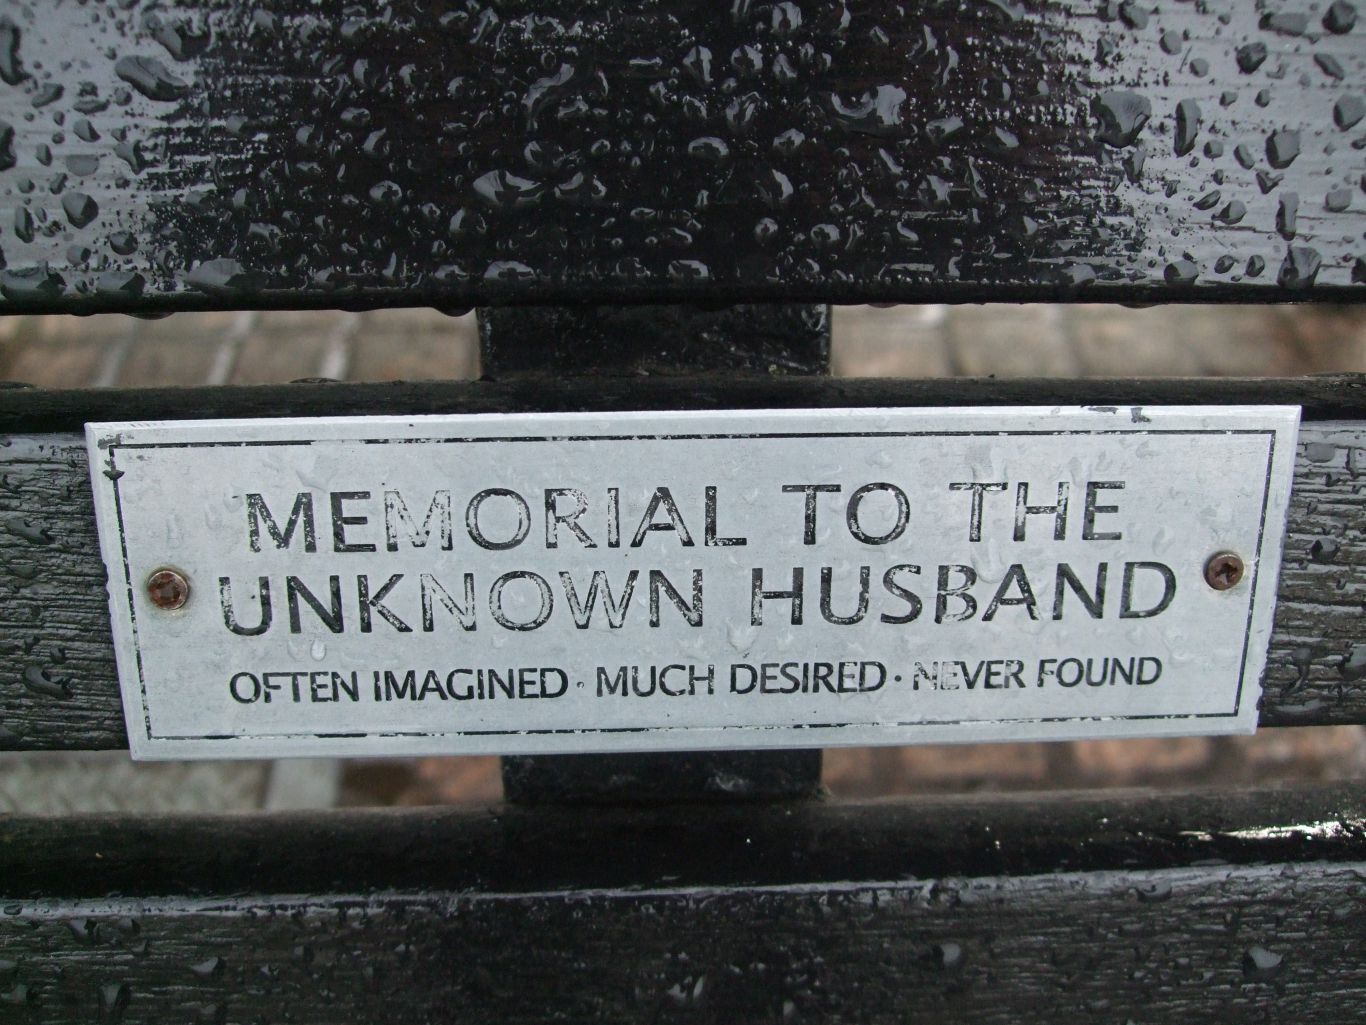 the plaque on the bench reads Memorial to the Unknown Husband